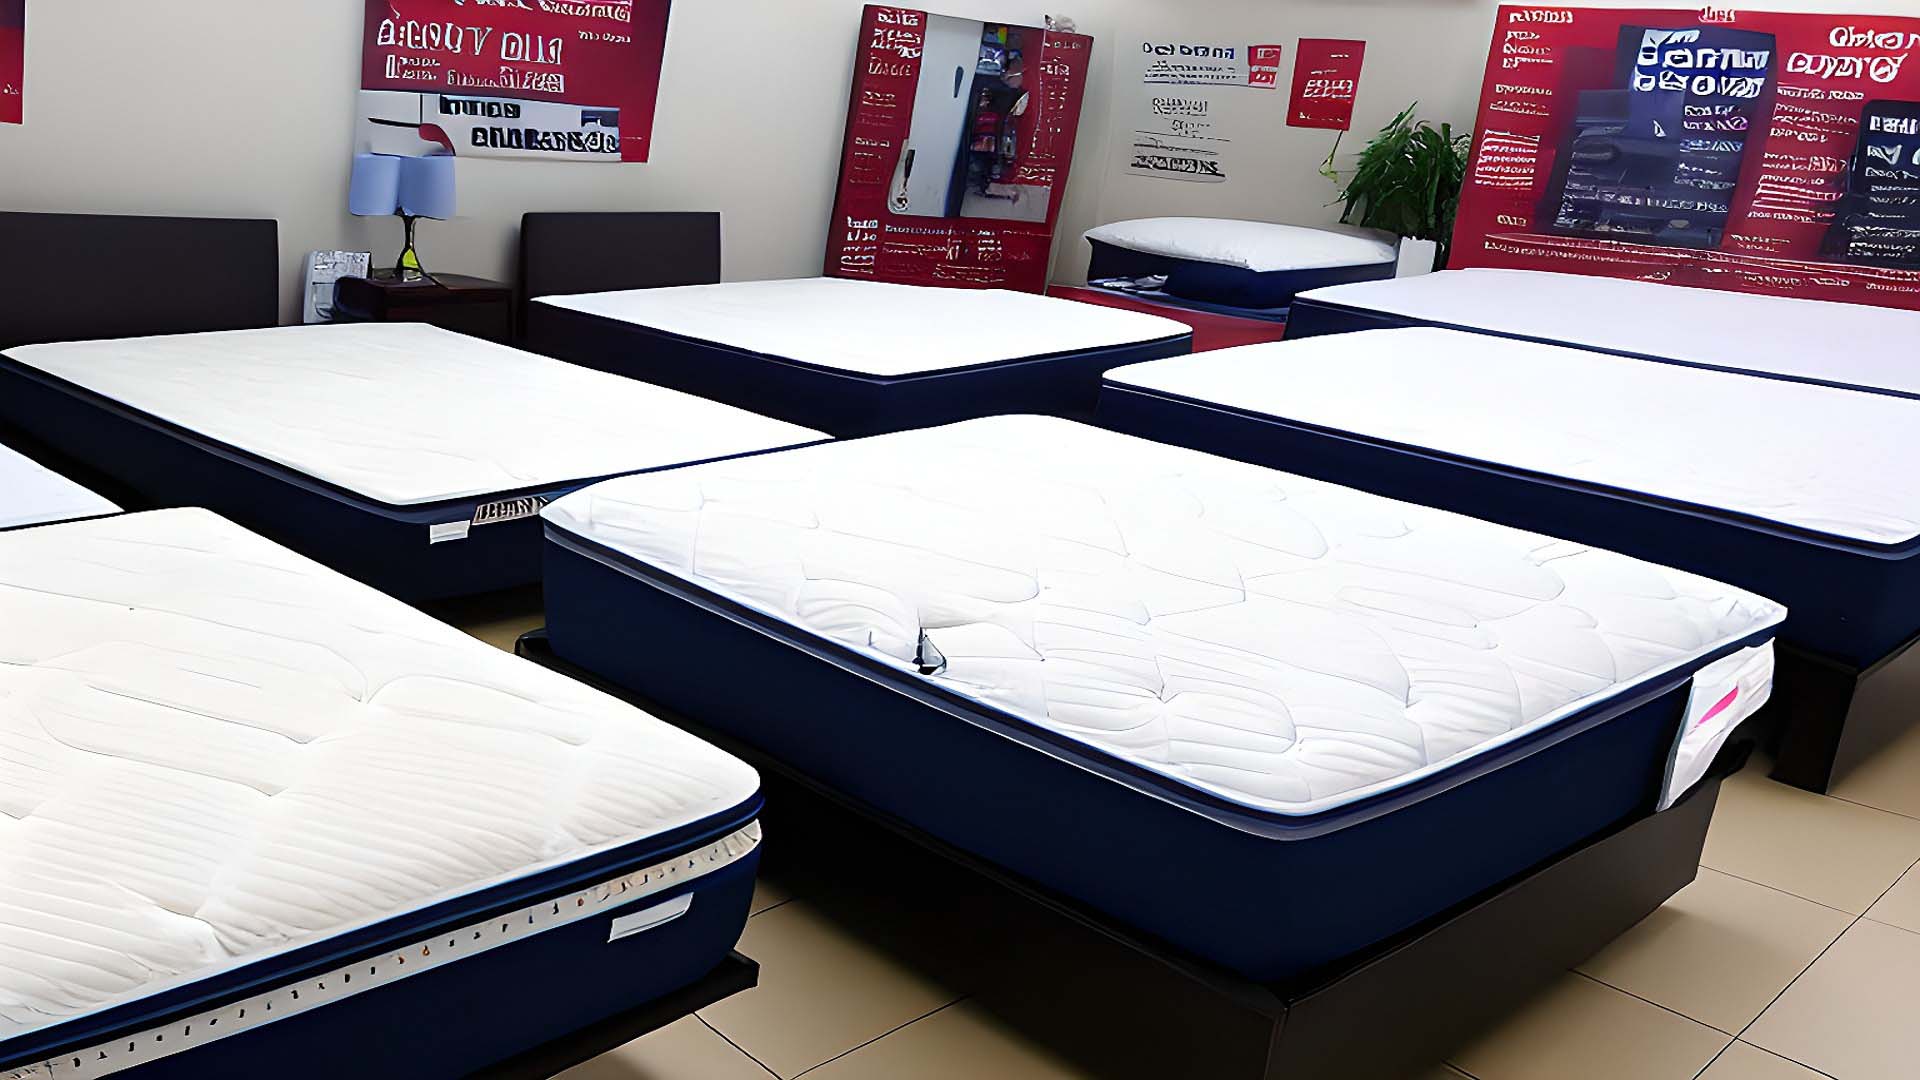 Mattress By Appointment in Norman, Oklahoma 73019